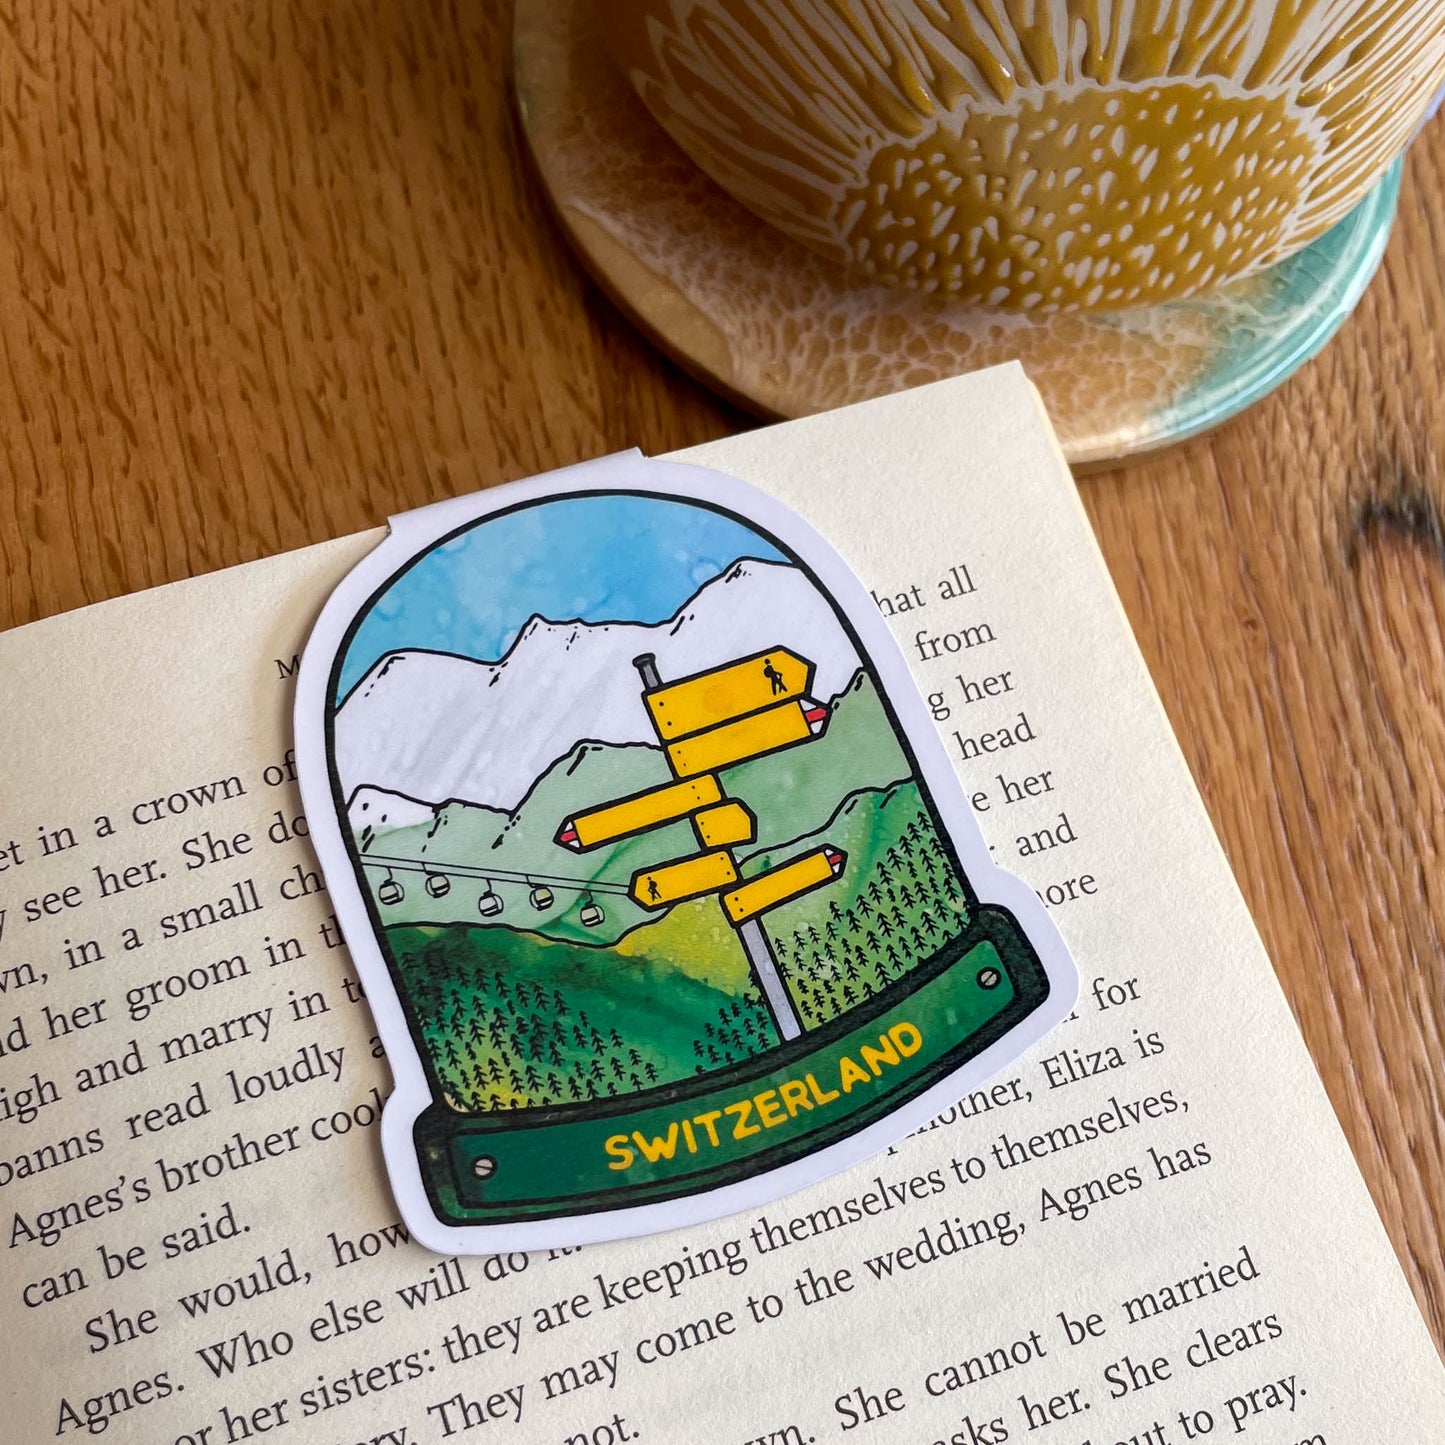 Magnetic Bookmark with Swiss Hiking Illustration